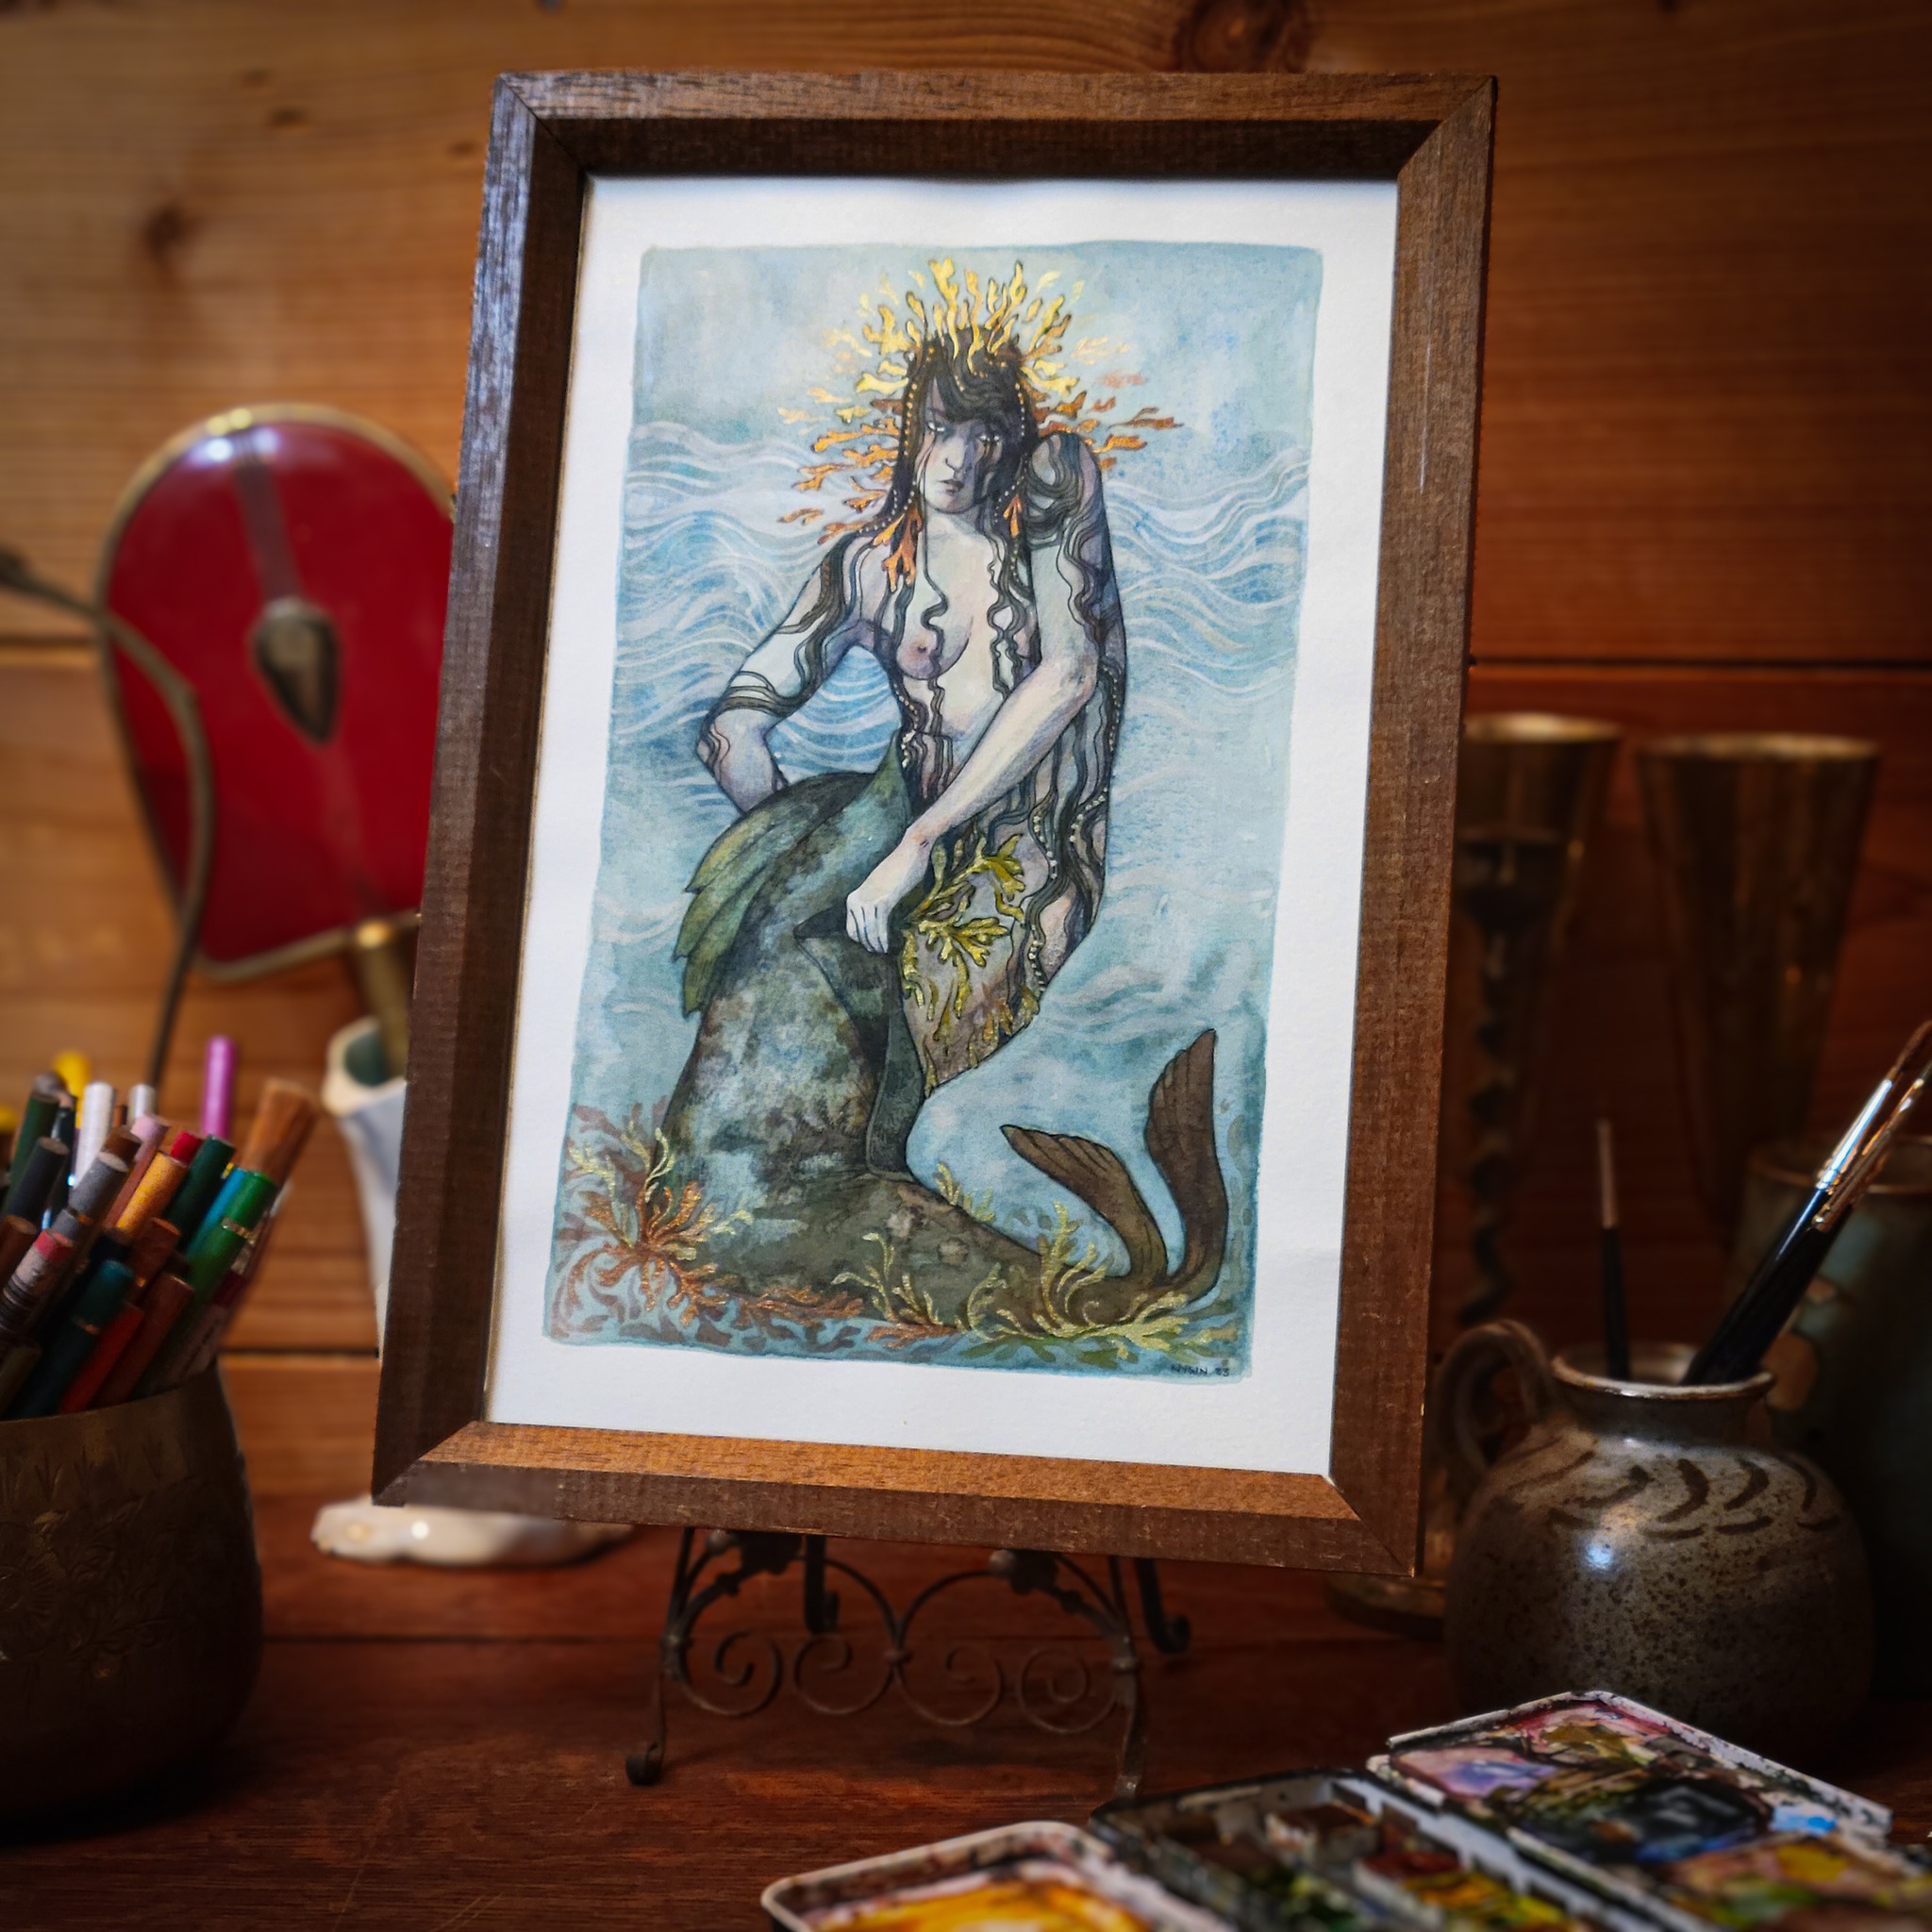 Don't Lose Your Skin - watercolour and pencil crayon.

*sold*

An ode to my love of the selkie, who's wildness lives in 